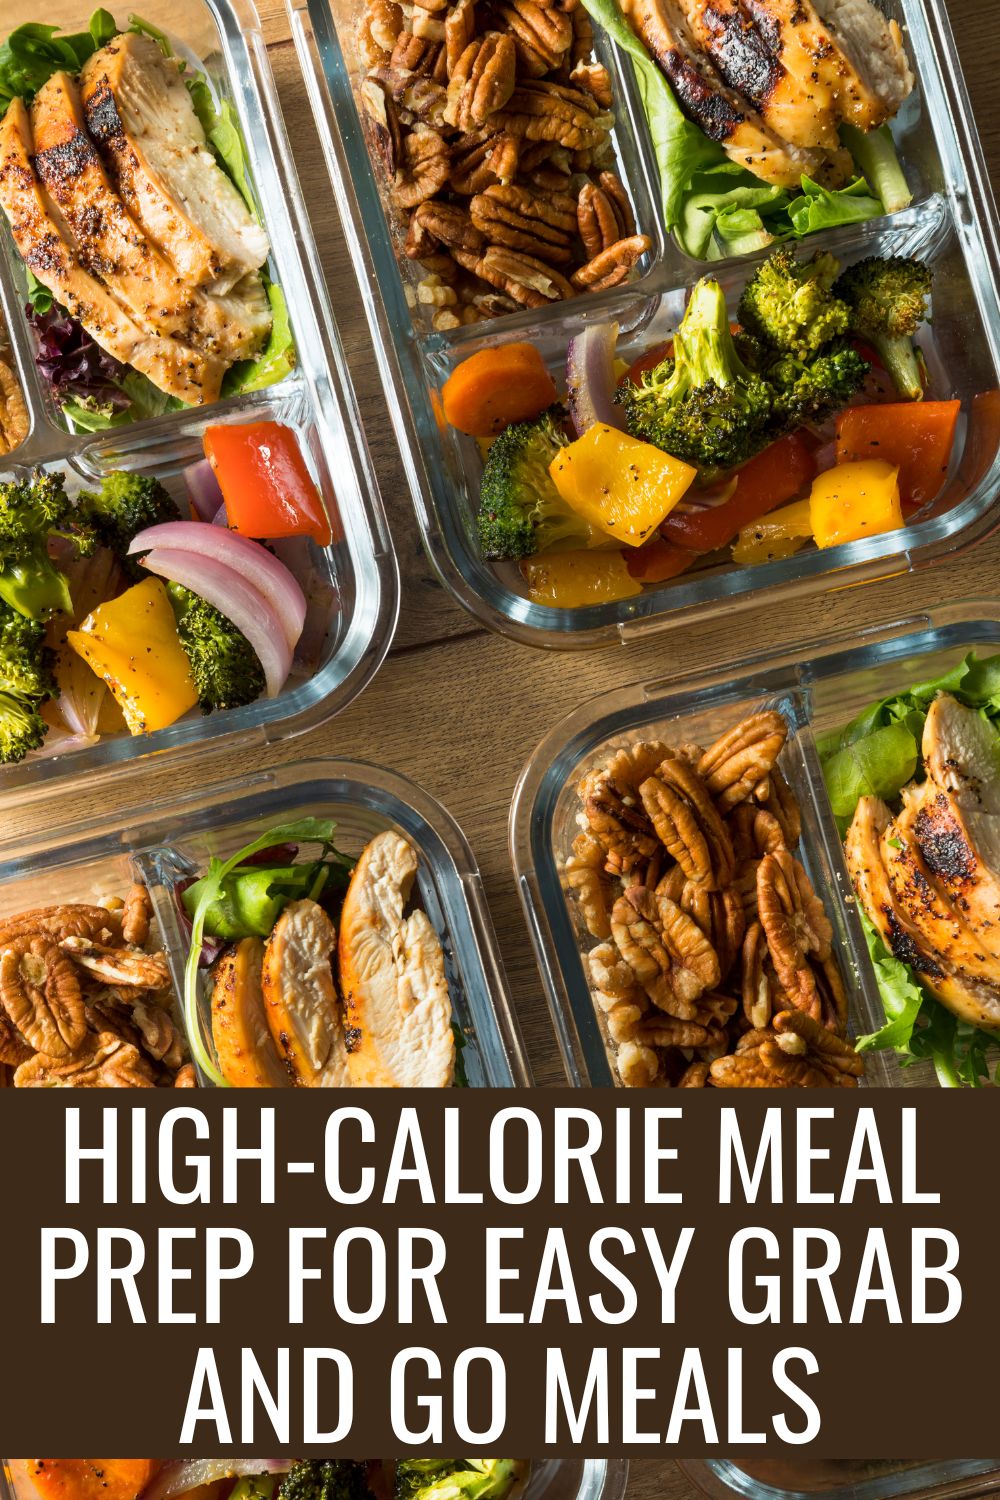 High-Calorie Meal Prep For Easy Grab And Go Meals.